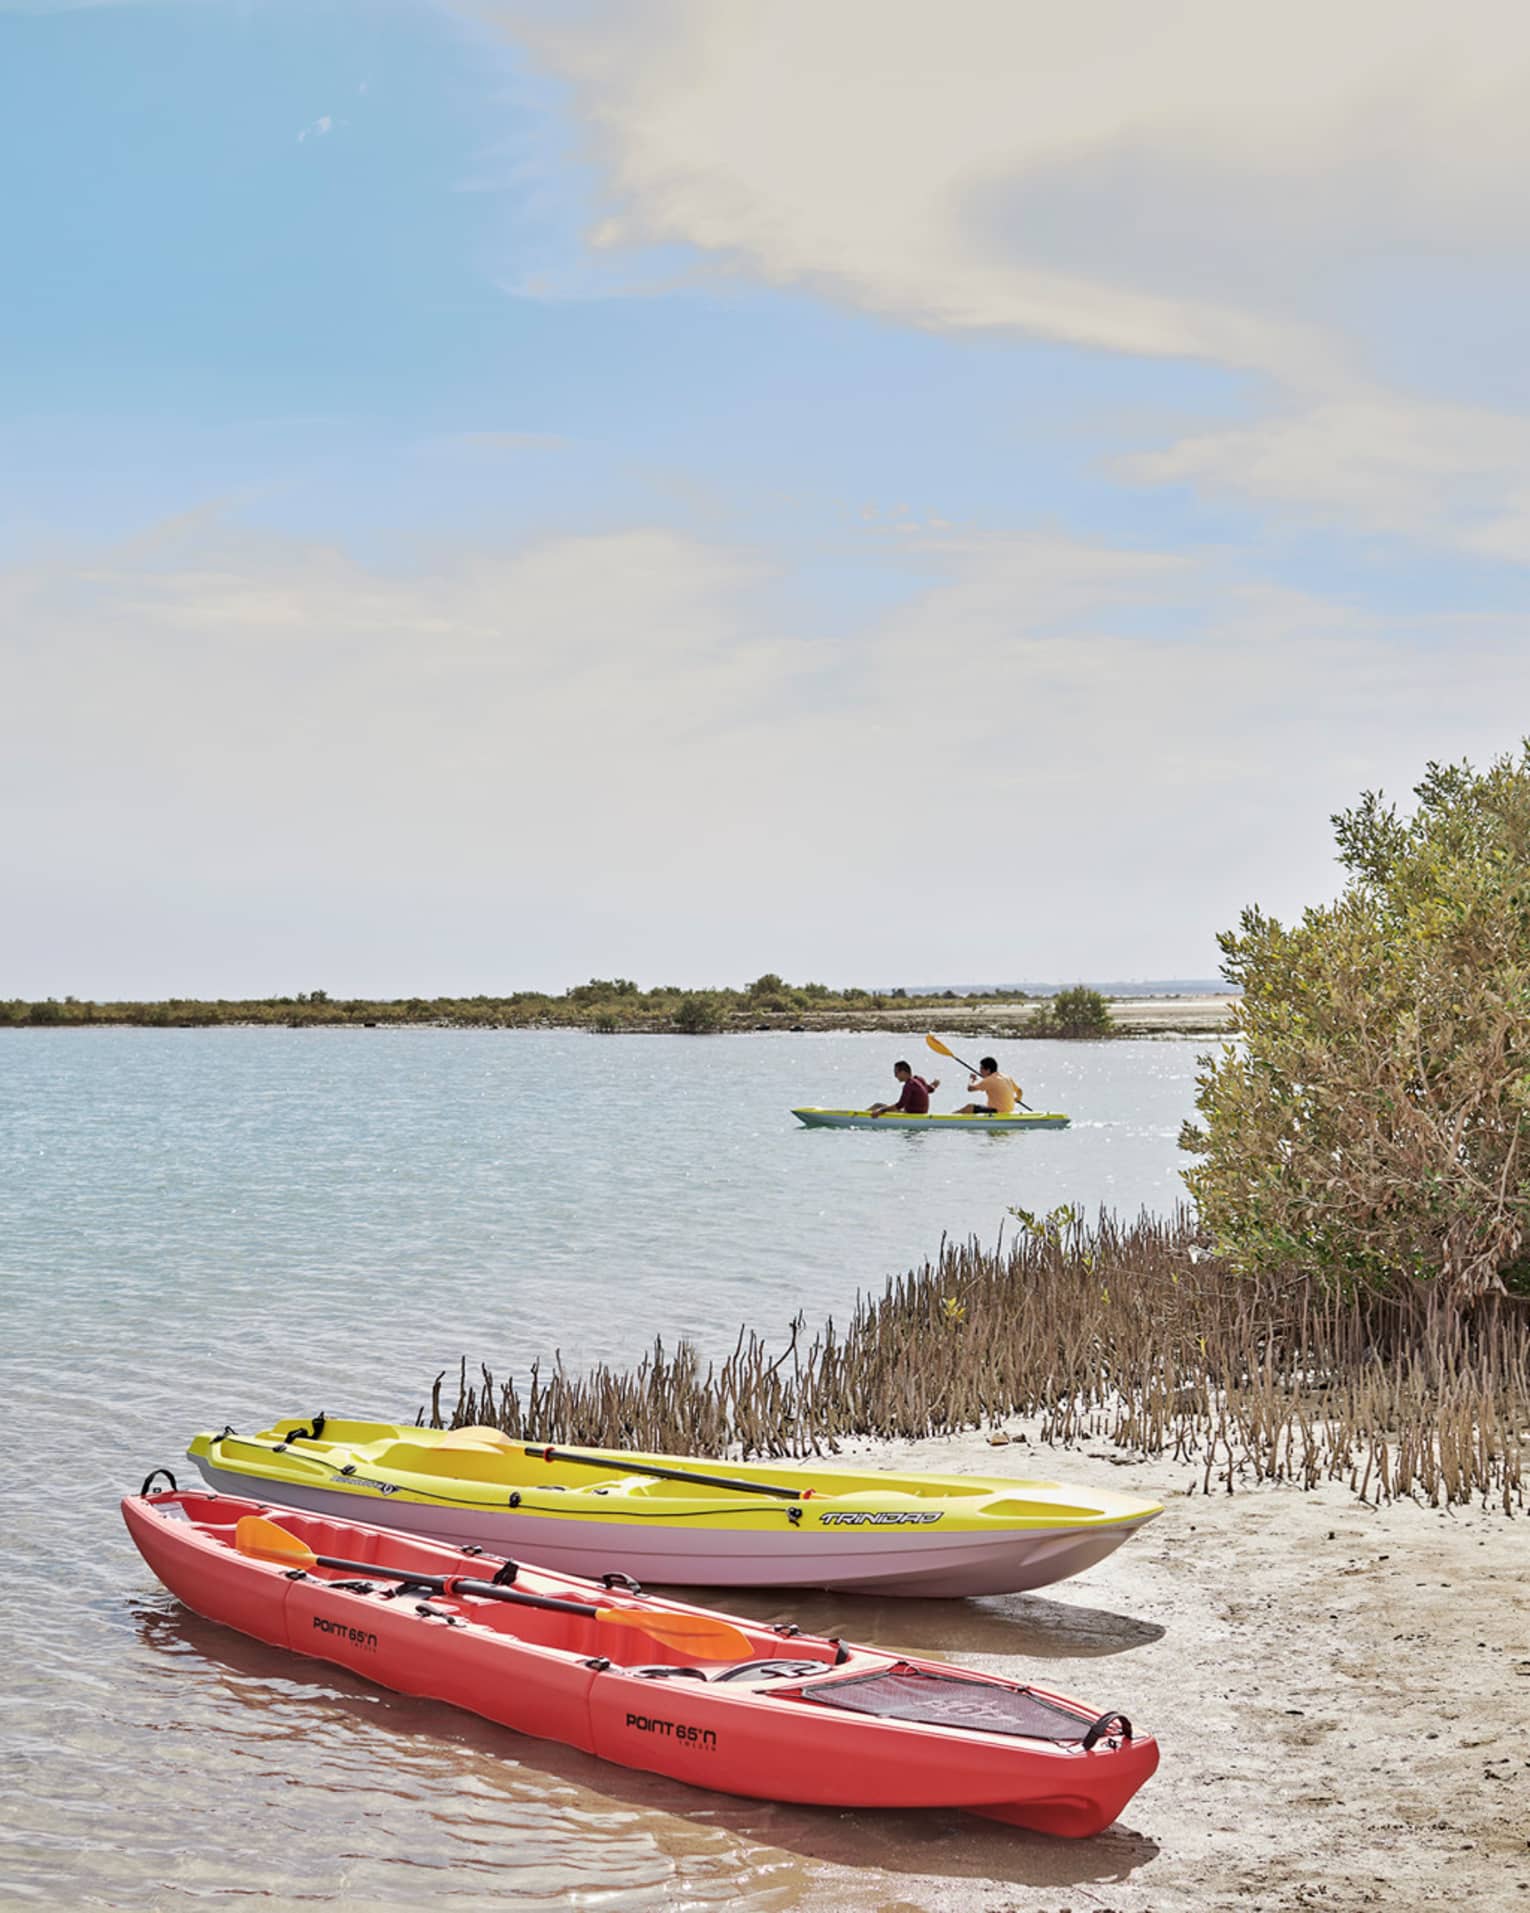 Two beached kayaks – one red, one yellow – amid grass and shrubs; two people paddling in a tandem kayak in the distance.